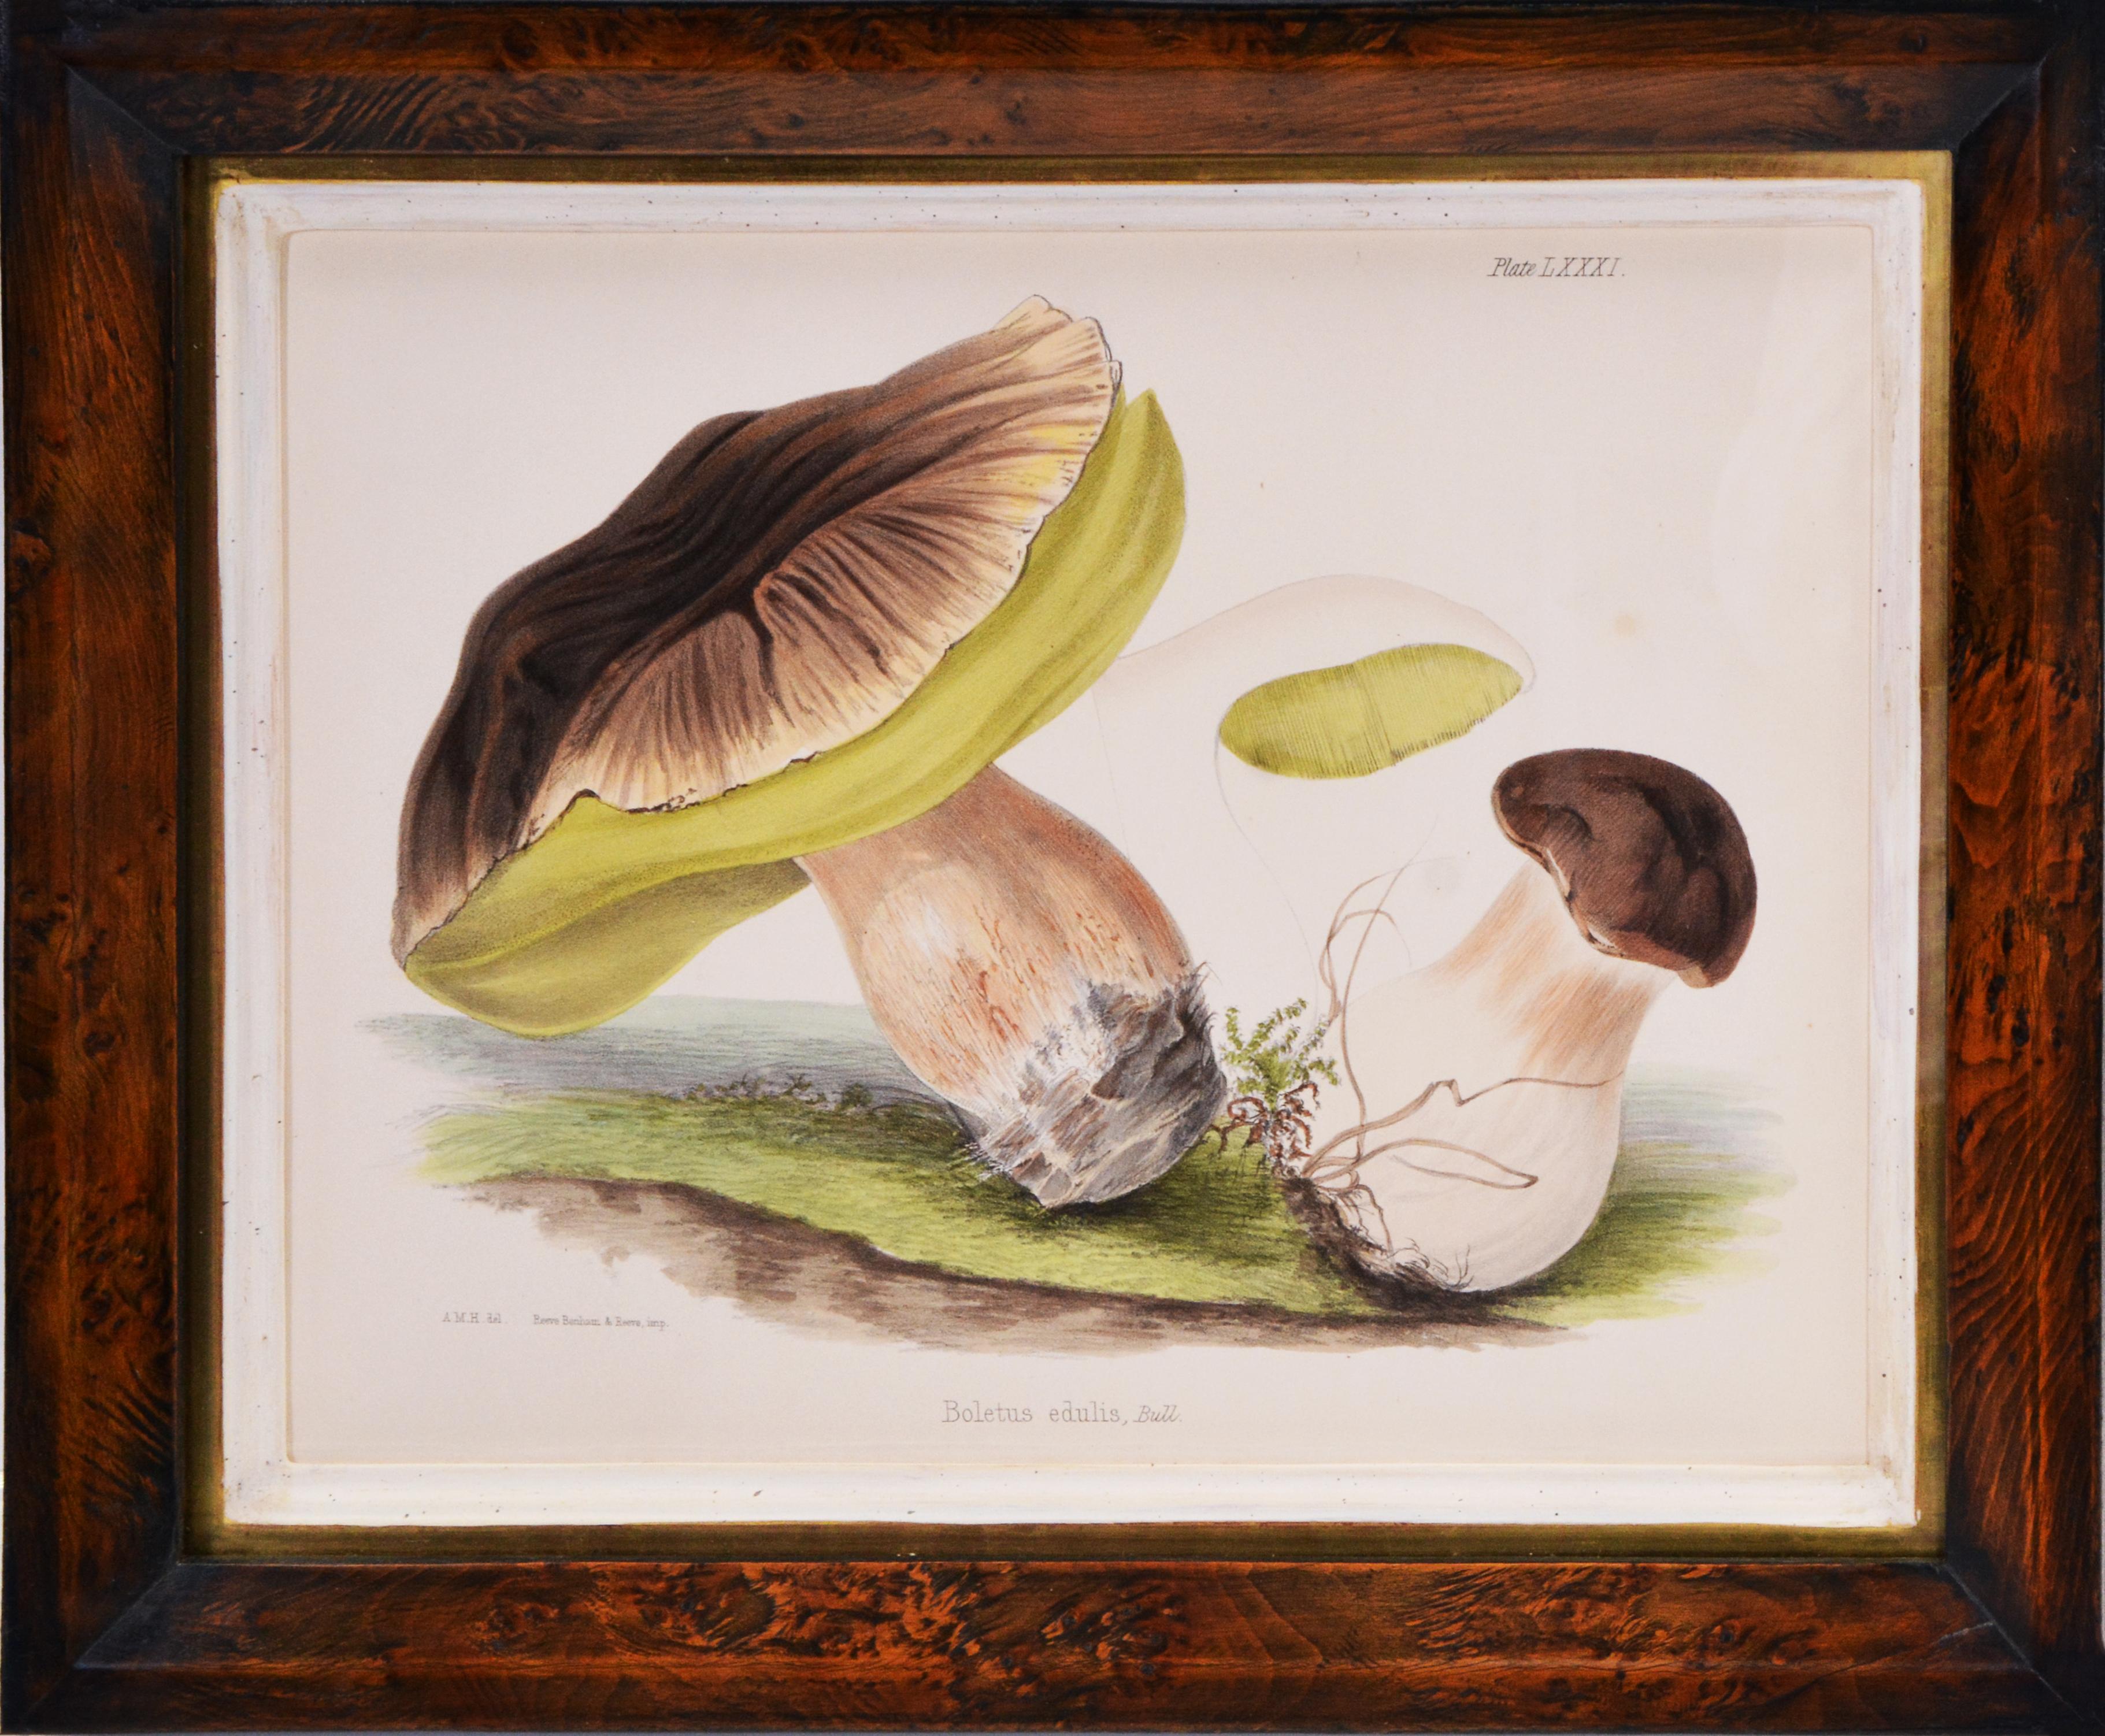 Hussey, Group of 8 Illustrations of British Mycology, Fungi and Mushrooms.  - Print by Unknown